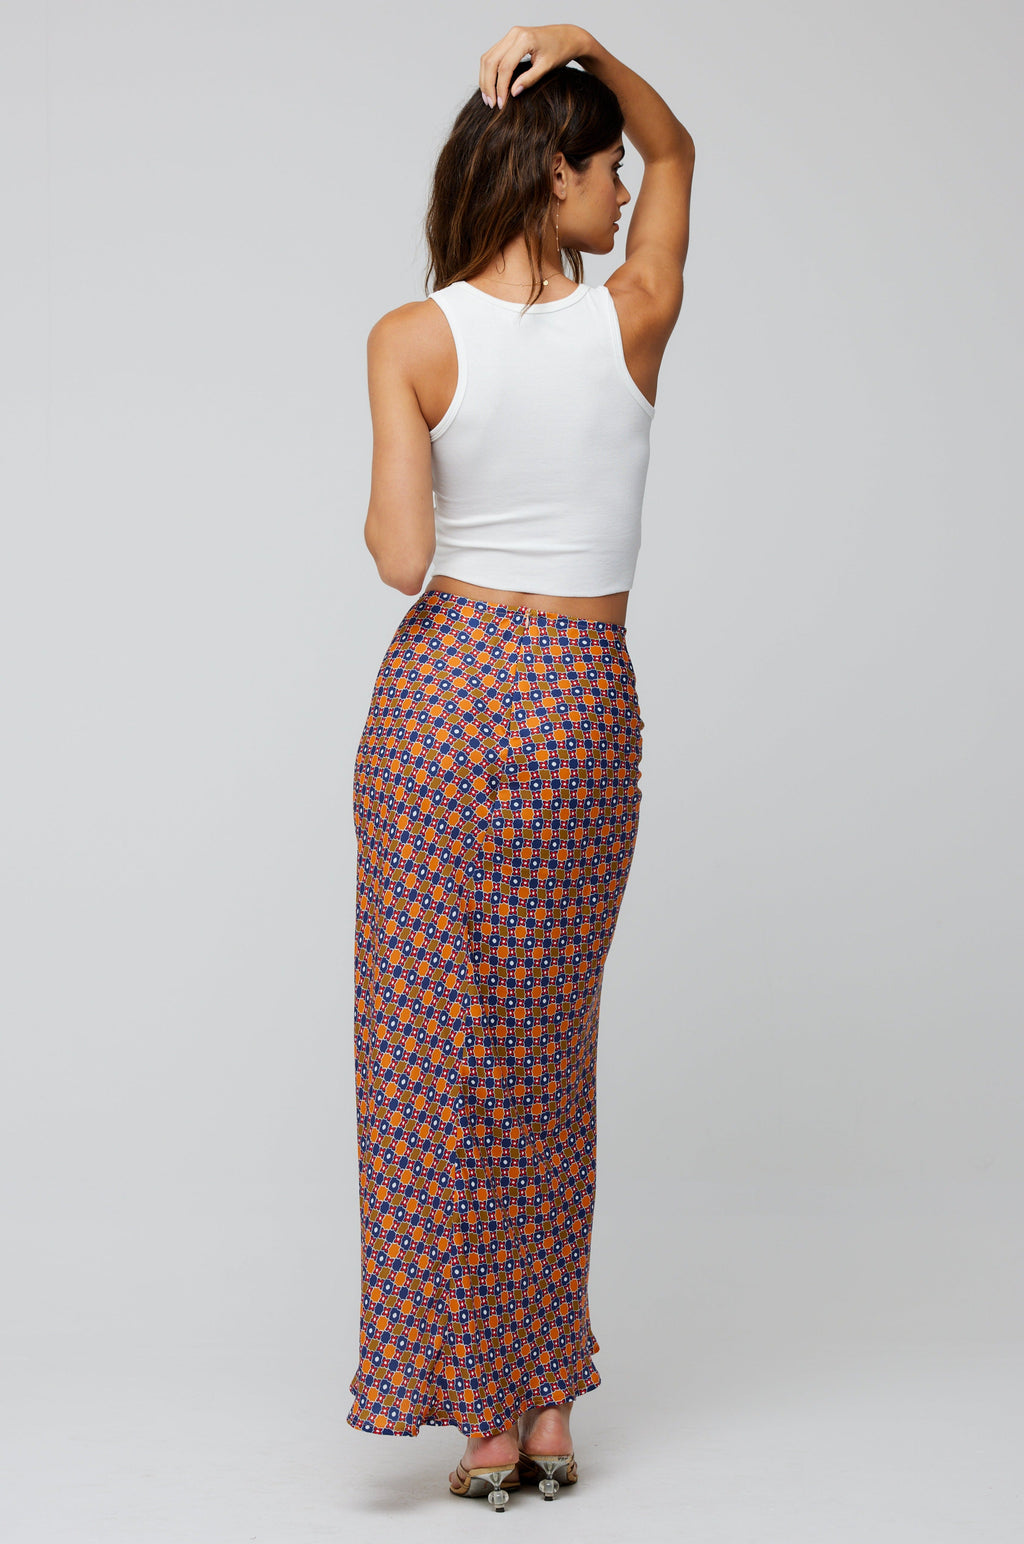 This is an image of Ziggy Skirt in Cortez - RESA featuring a model wearing the dress